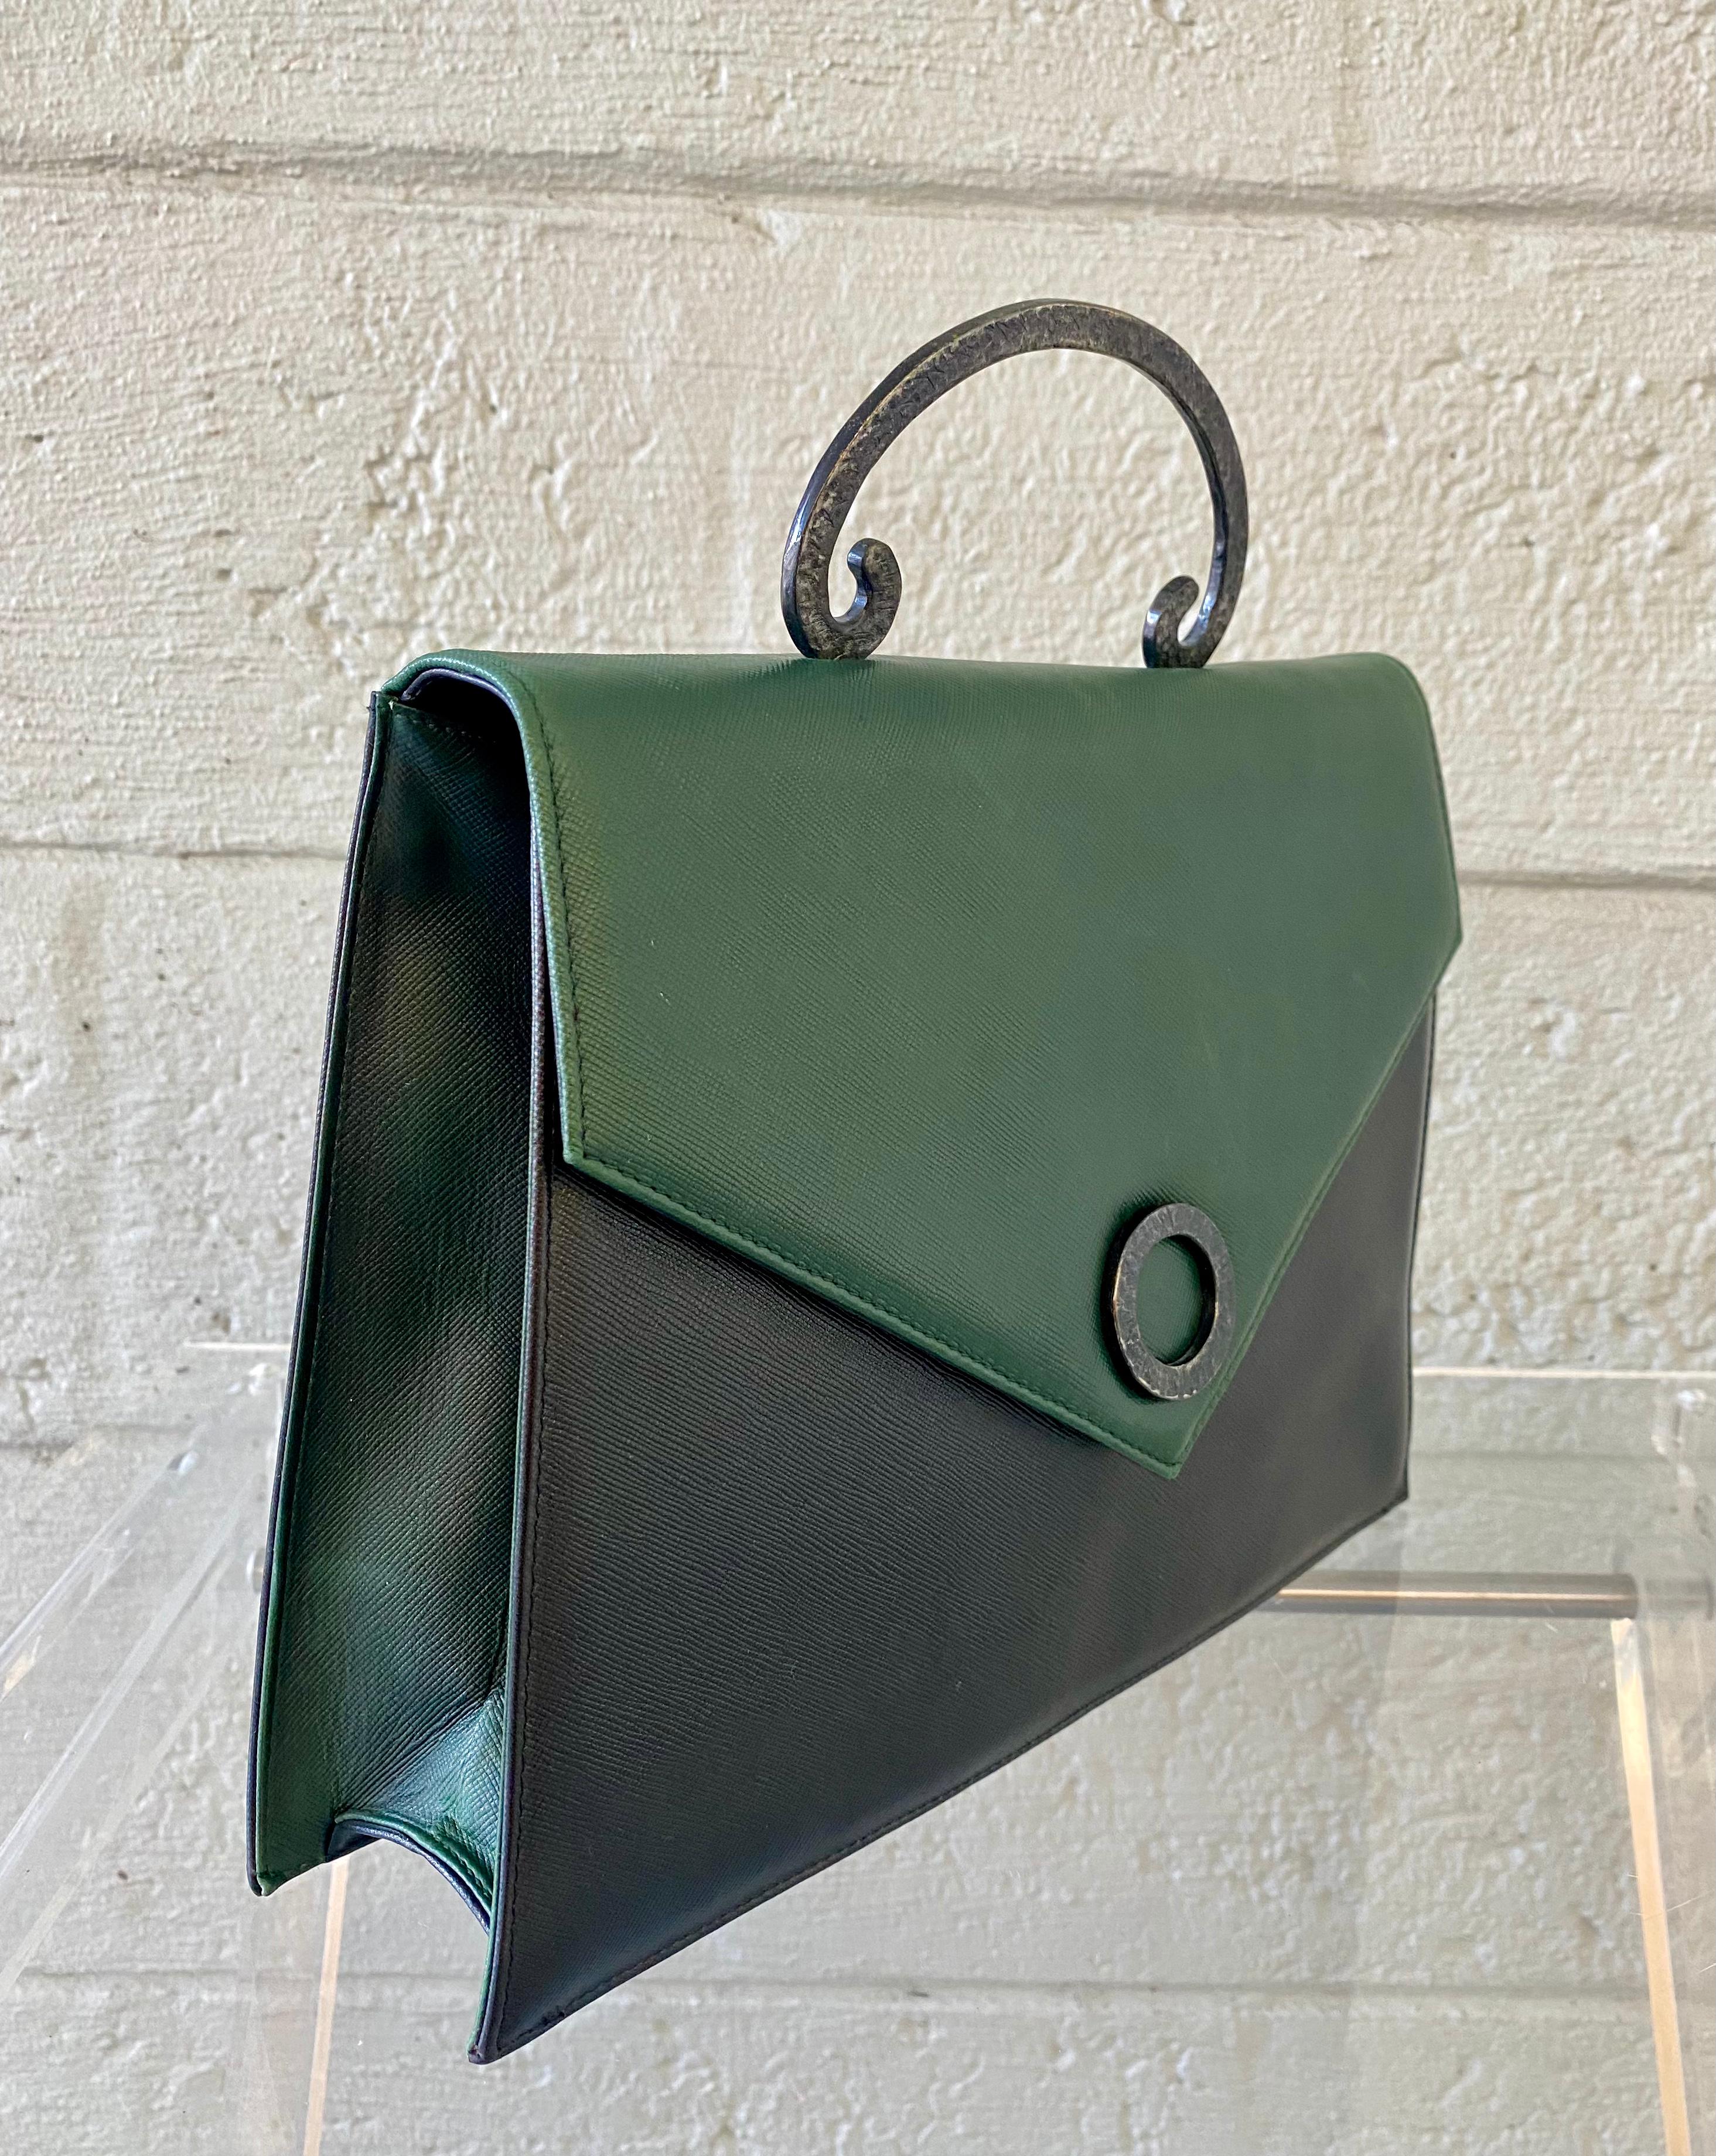 The Vintage Kelly Flap style bag from Pablo Picassi is one of the famed luxury goods house's most coveted and exclusive items. This flap bag is made of black and green leather. Black leather lining. Open interior back exterior pockets.compartments.